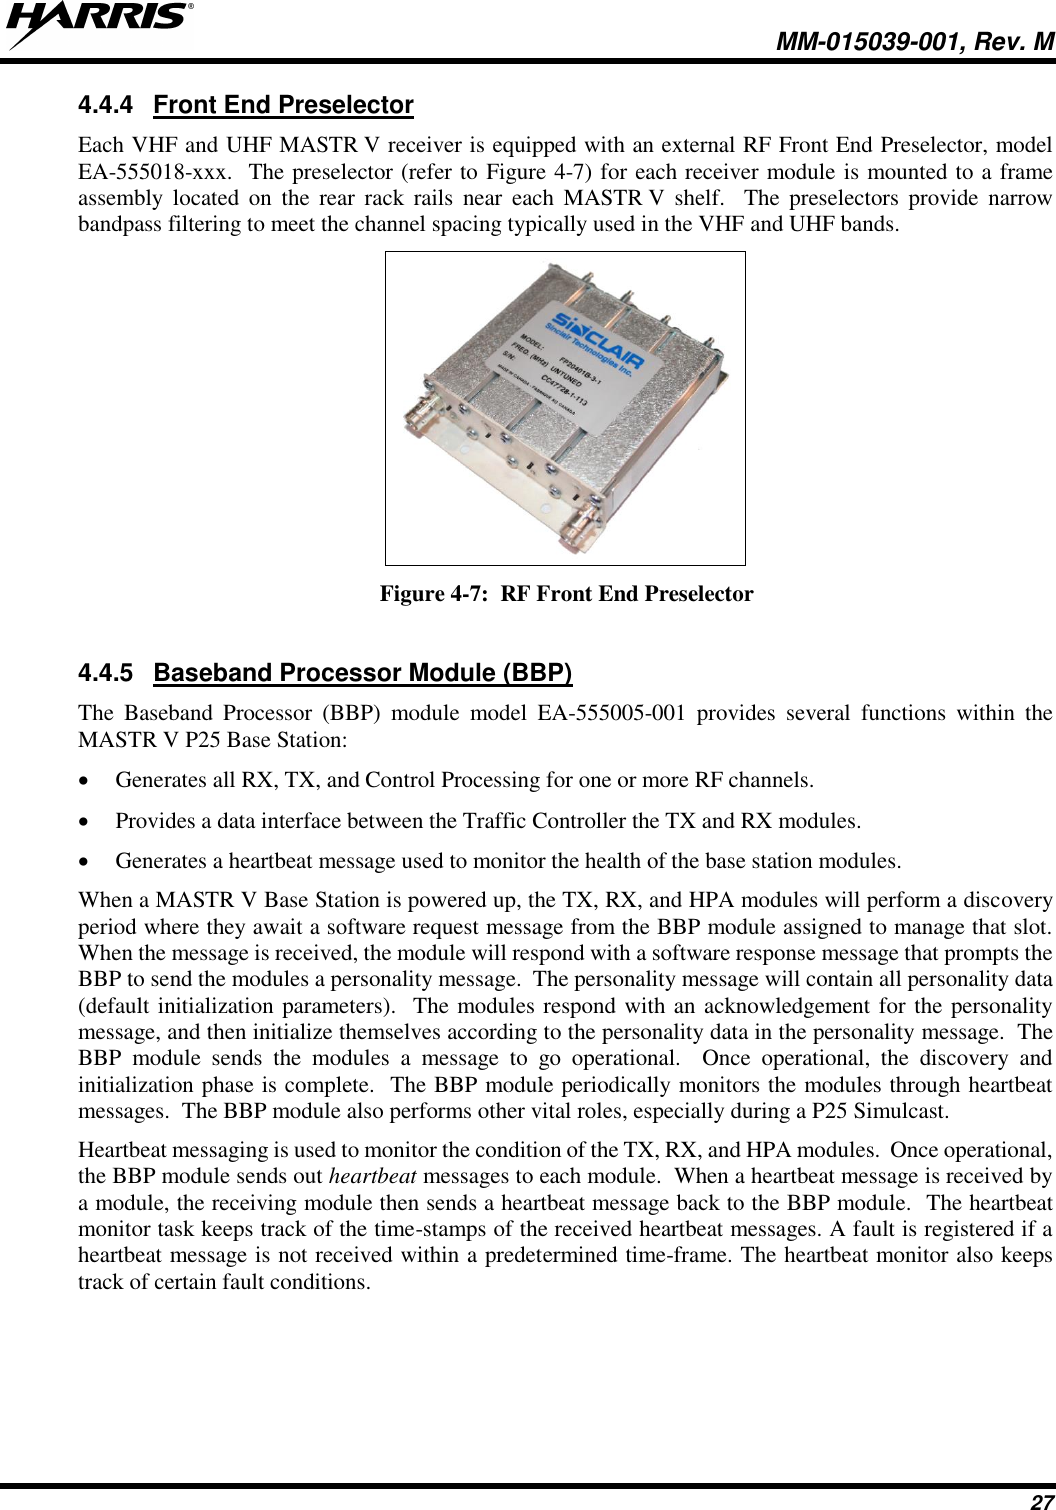   MM-015039-001, Rev. M 27 4.4.4  Front End Preselector Each VHF and UHF MASTR V receiver is equipped with an external RF Front End Preselector, model EA-555018-xxx.  The preselector (refer to Figure 4-7) for each receiver module is mounted to a frame assembly  located  on  the  rear  rack  rails  near  each  MASTR V shelf.    The  preselectors  provide  narrow bandpass filtering to meet the channel spacing typically used in the VHF and UHF bands.  Figure 4-7:  RF Front End Preselector  4.4.5  Baseband Processor Module (BBP) The  Baseband  Processor  (BBP)  module  model  EA-555005-001  provides  several  functions  within  the MASTR V P25 Base Station: • Generates all RX, TX, and Control Processing for one or more RF channels. • Provides a data interface between the Traffic Controller the TX and RX modules. • Generates a heartbeat message used to monitor the health of the base station modules. When a MASTR V Base Station is powered up, the TX, RX, and HPA modules will perform a discovery period where they await a software request message from the BBP module assigned to manage that slot.  When the message is received, the module will respond with a software response message that prompts the BBP to send the modules a personality message.  The personality message will contain all personality data (default initialization parameters).  The modules respond with an acknowledgement for the personality message, and then initialize themselves according to the personality data in the personality message.  The BBP  module  sends  the  modules  a  message  to  go  operational.    Once  operational,  the  discovery  and initialization phase is complete.  The BBP module periodically monitors the modules through heartbeat messages.  The BBP module also performs other vital roles, especially during a P25 Simulcast. Heartbeat messaging is used to monitor the condition of the TX, RX, and HPA modules.  Once operational, the BBP module sends out heartbeat messages to each module.  When a heartbeat message is received by a module, the receiving module then sends a heartbeat message back to the BBP module.  The heartbeat monitor task keeps track of the time-stamps of the received heartbeat messages. A fault is registered if a heartbeat message is not received within a predetermined time-frame. The heartbeat monitor also keeps track of certain fault conditions. 